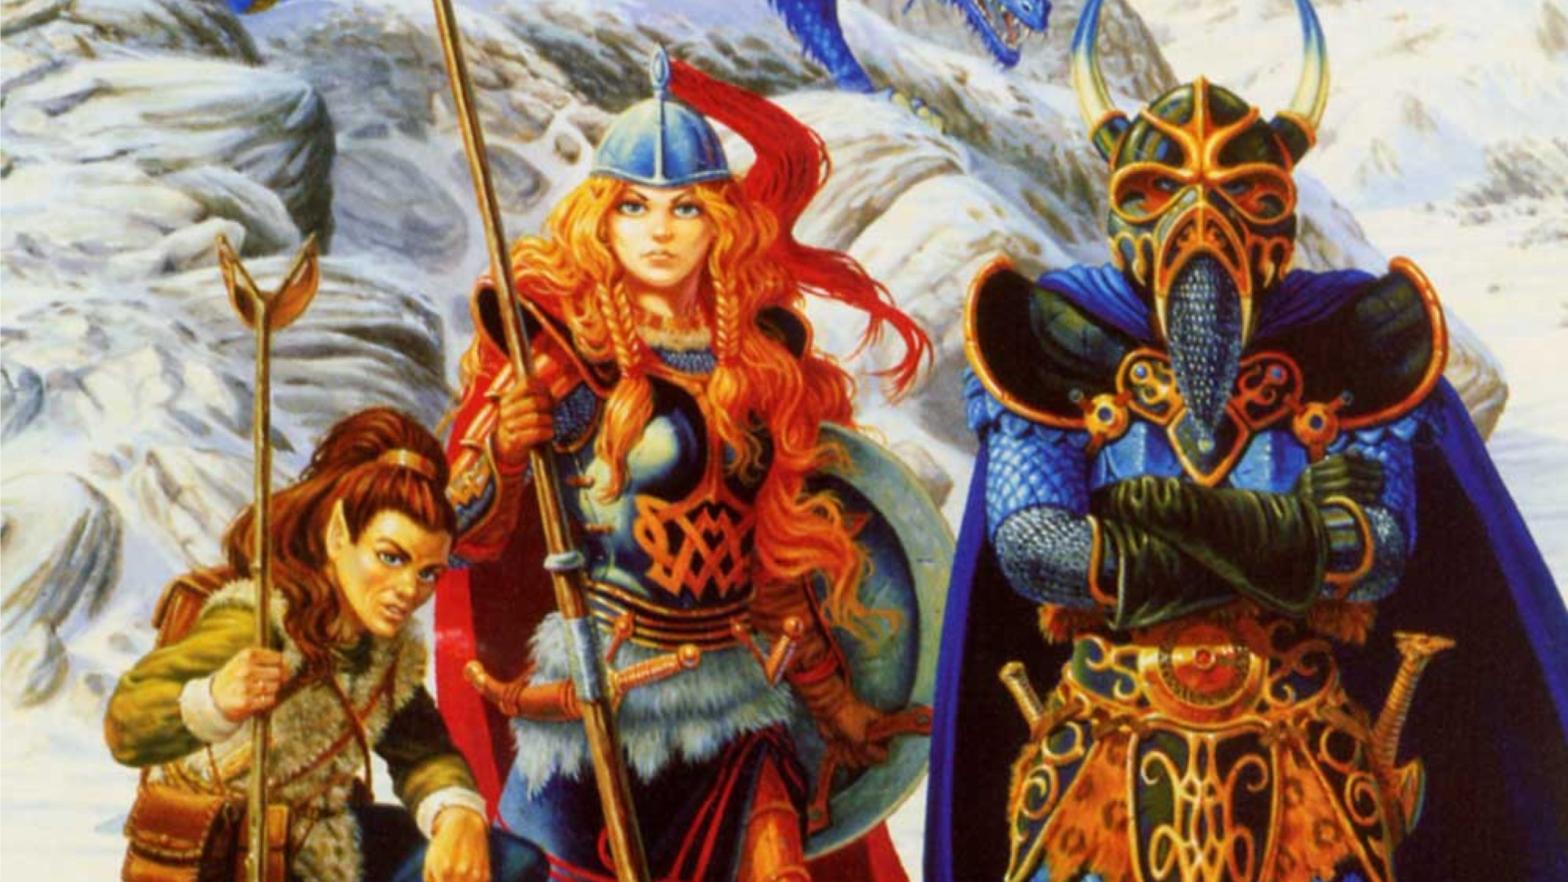 Inset of the original Dragons of Winter Night cover by Larry Elmore. L-R: Tasslehoff, Laurana, and a certain Dragon Highlord. (Image: Wizards of the Coast)